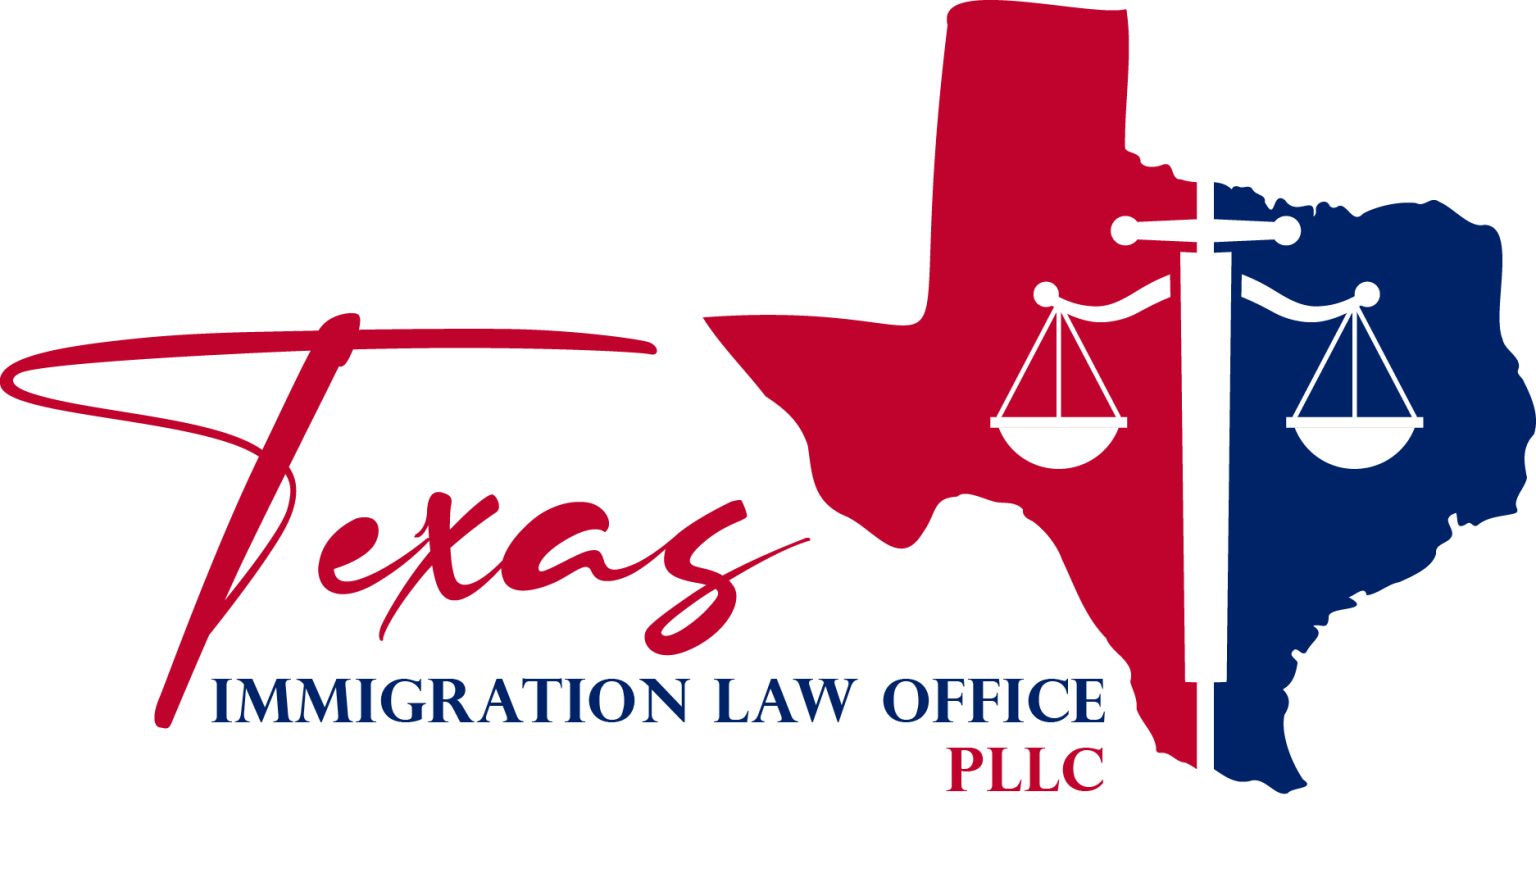 About Us - Texas Immigration Law Office